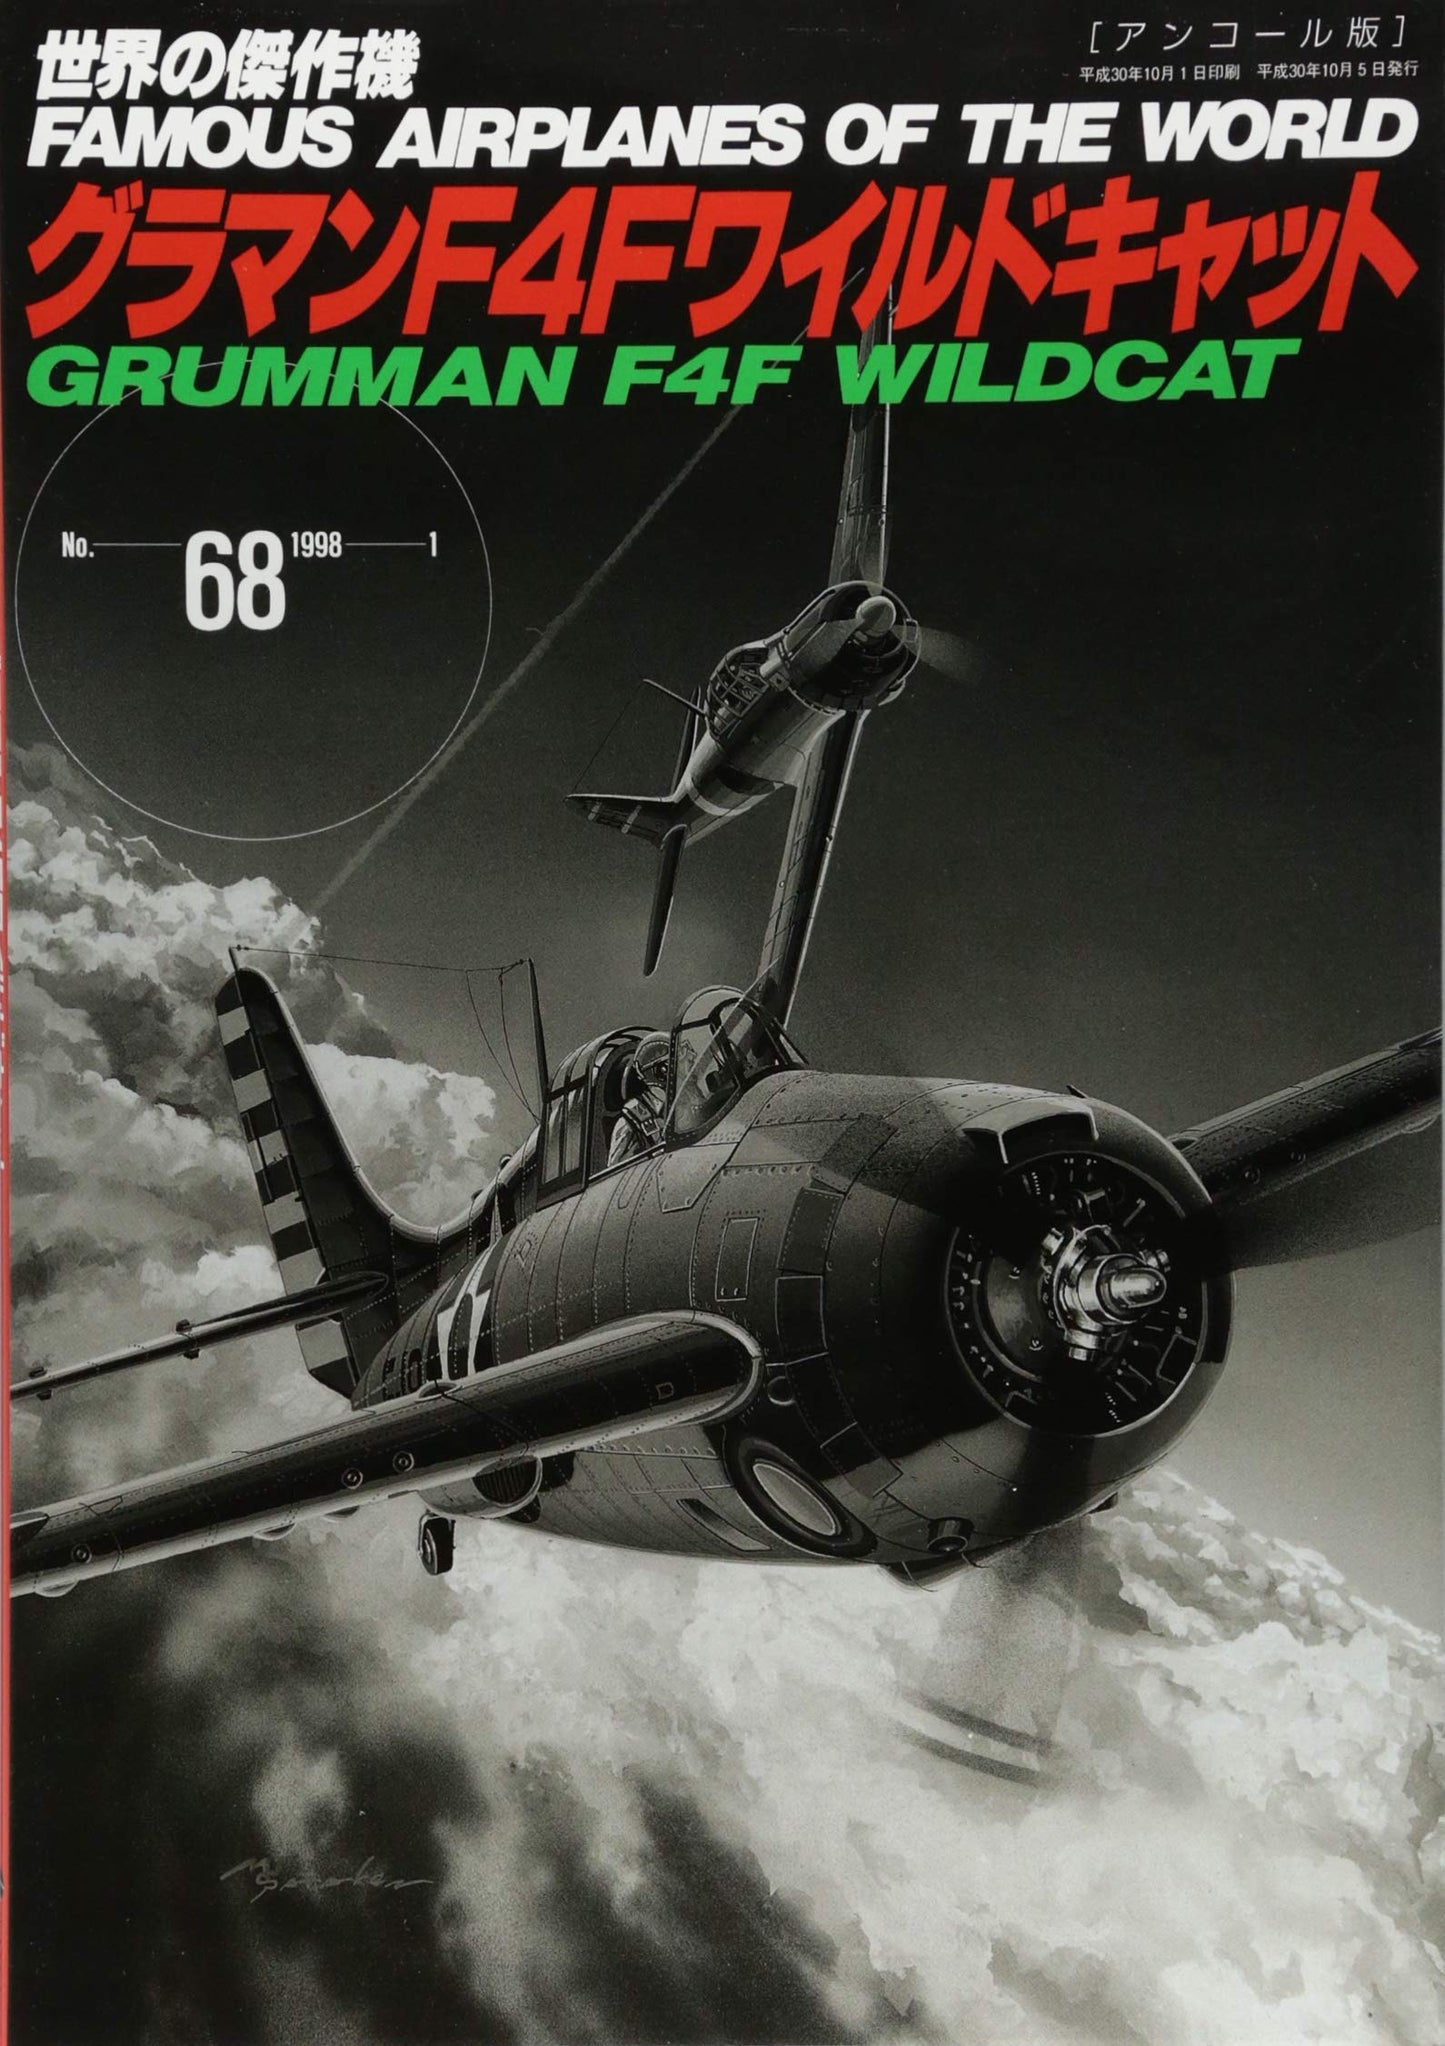 Grumman F4F Wildcat / Famous Airplanes of The World No.68